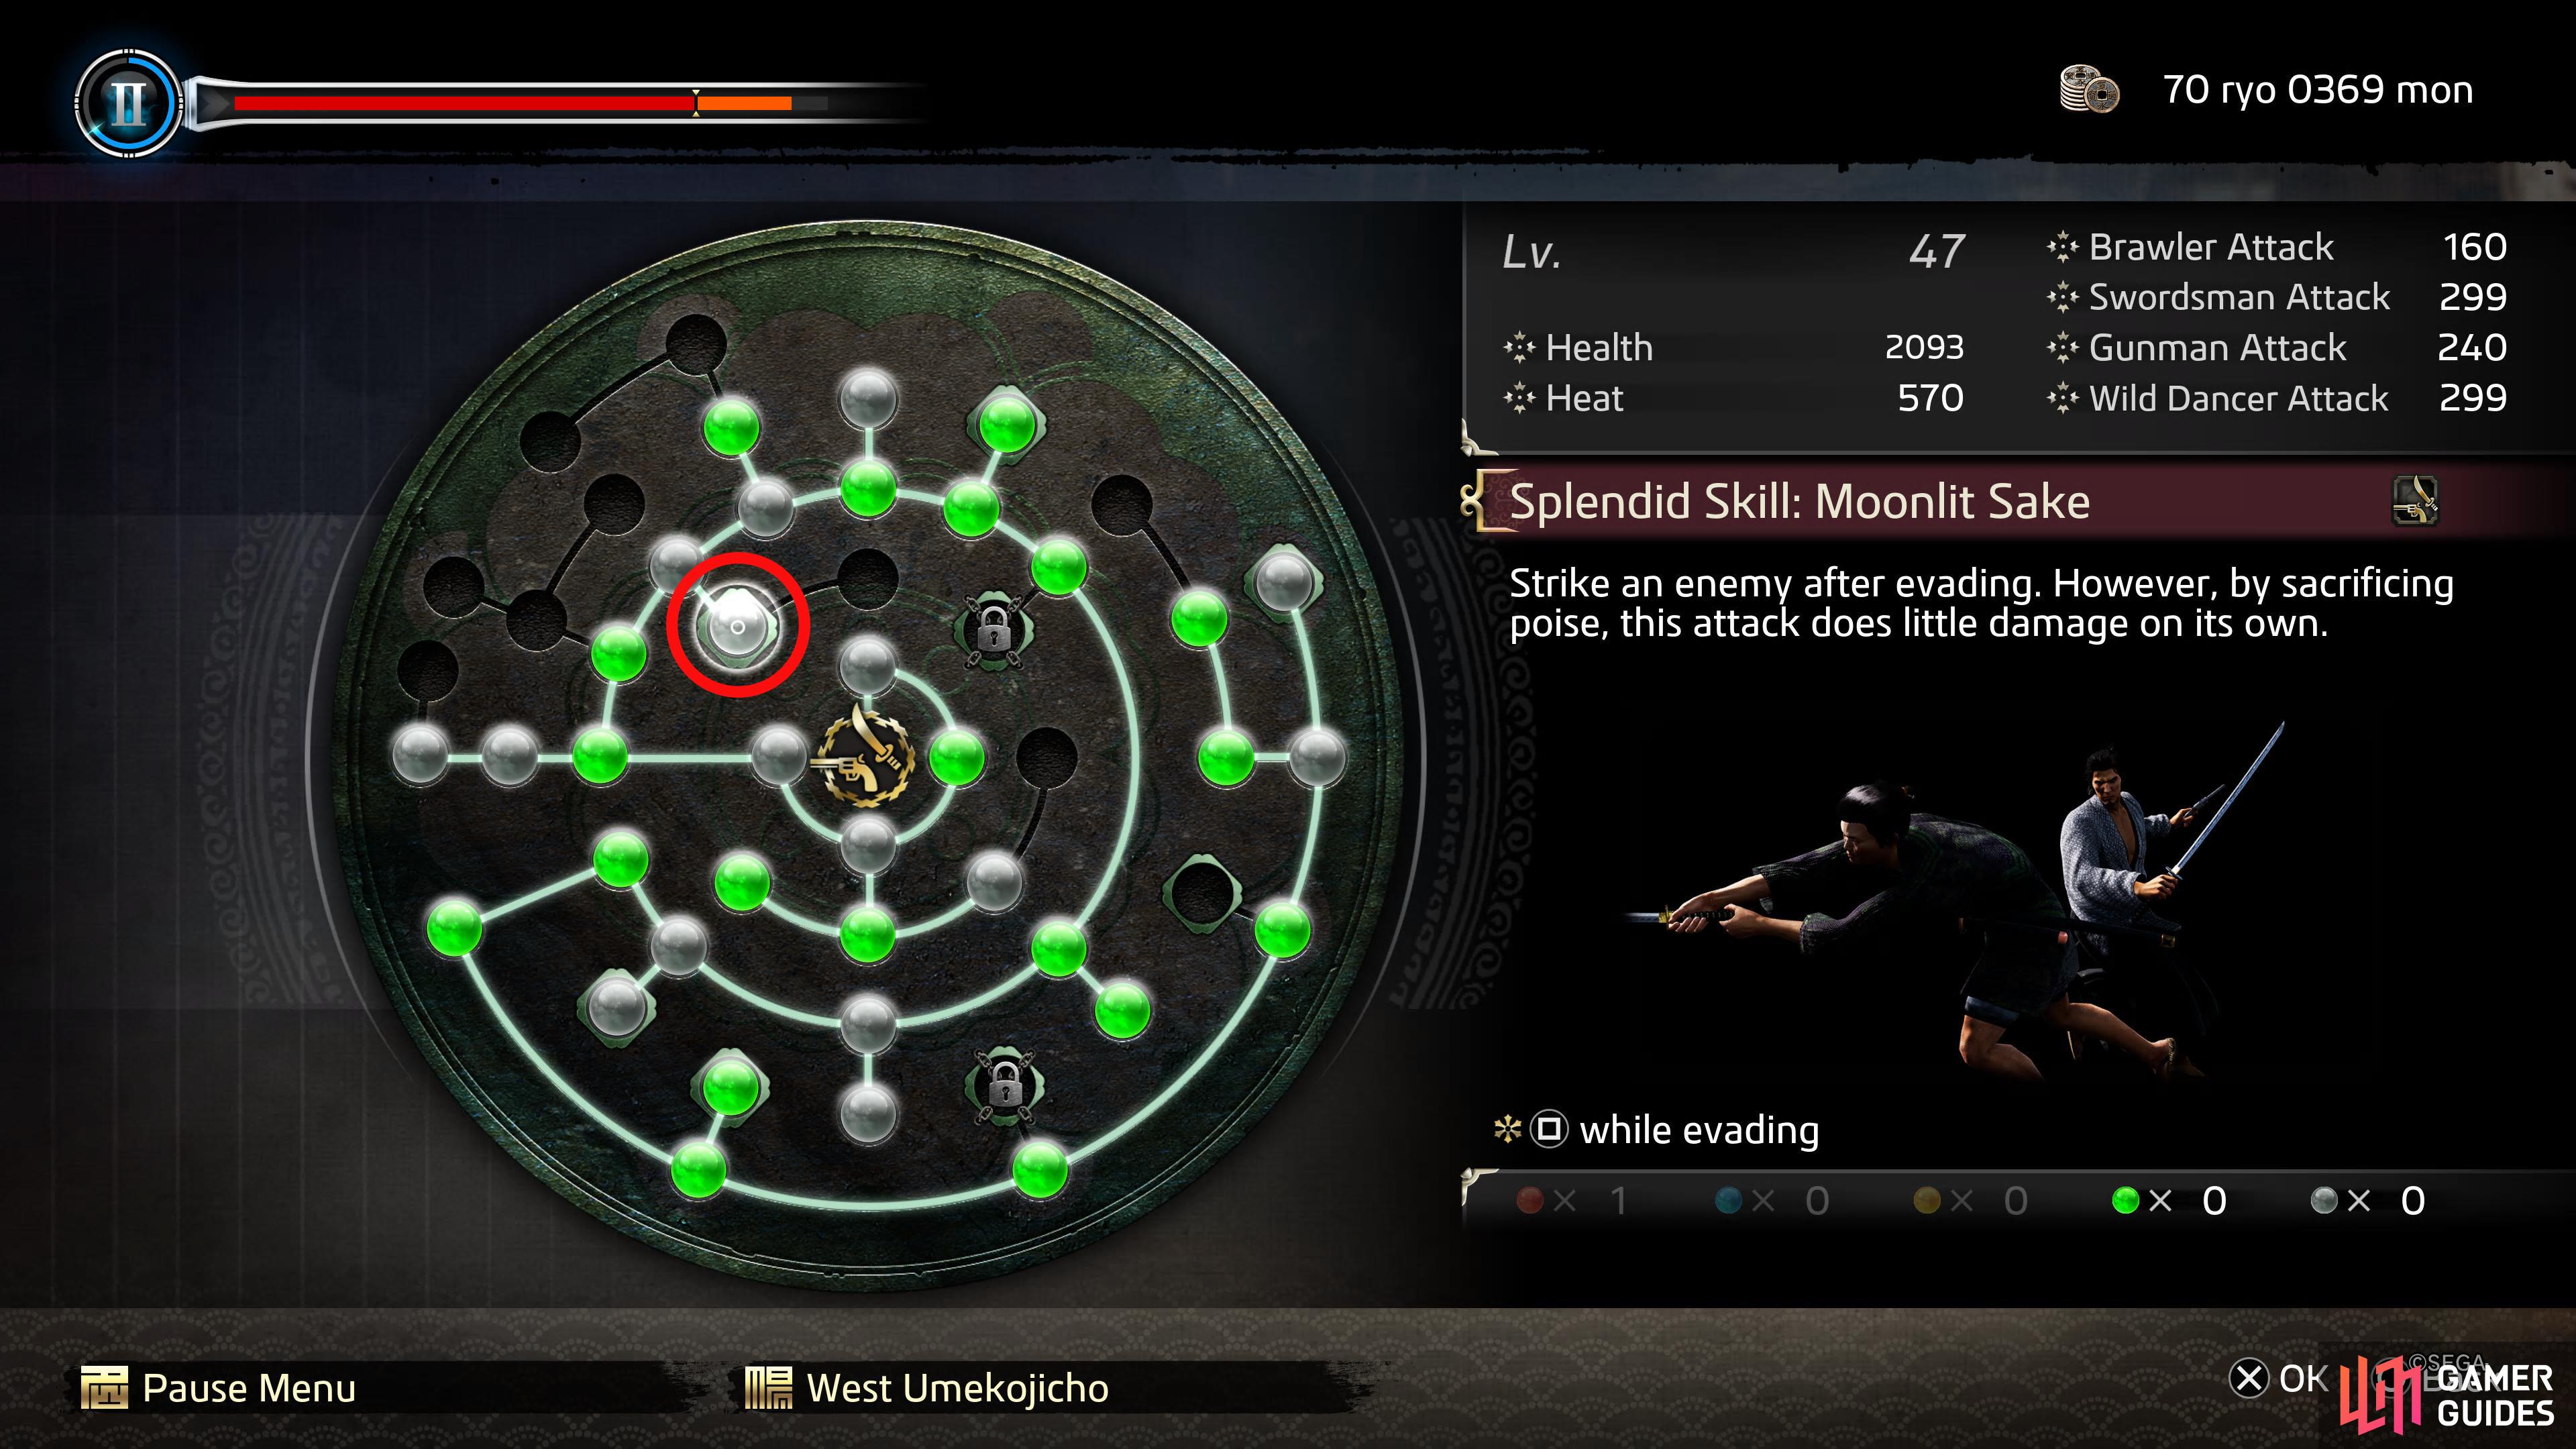 Here’s where Moonlit Sake is on the Ability Wheel.